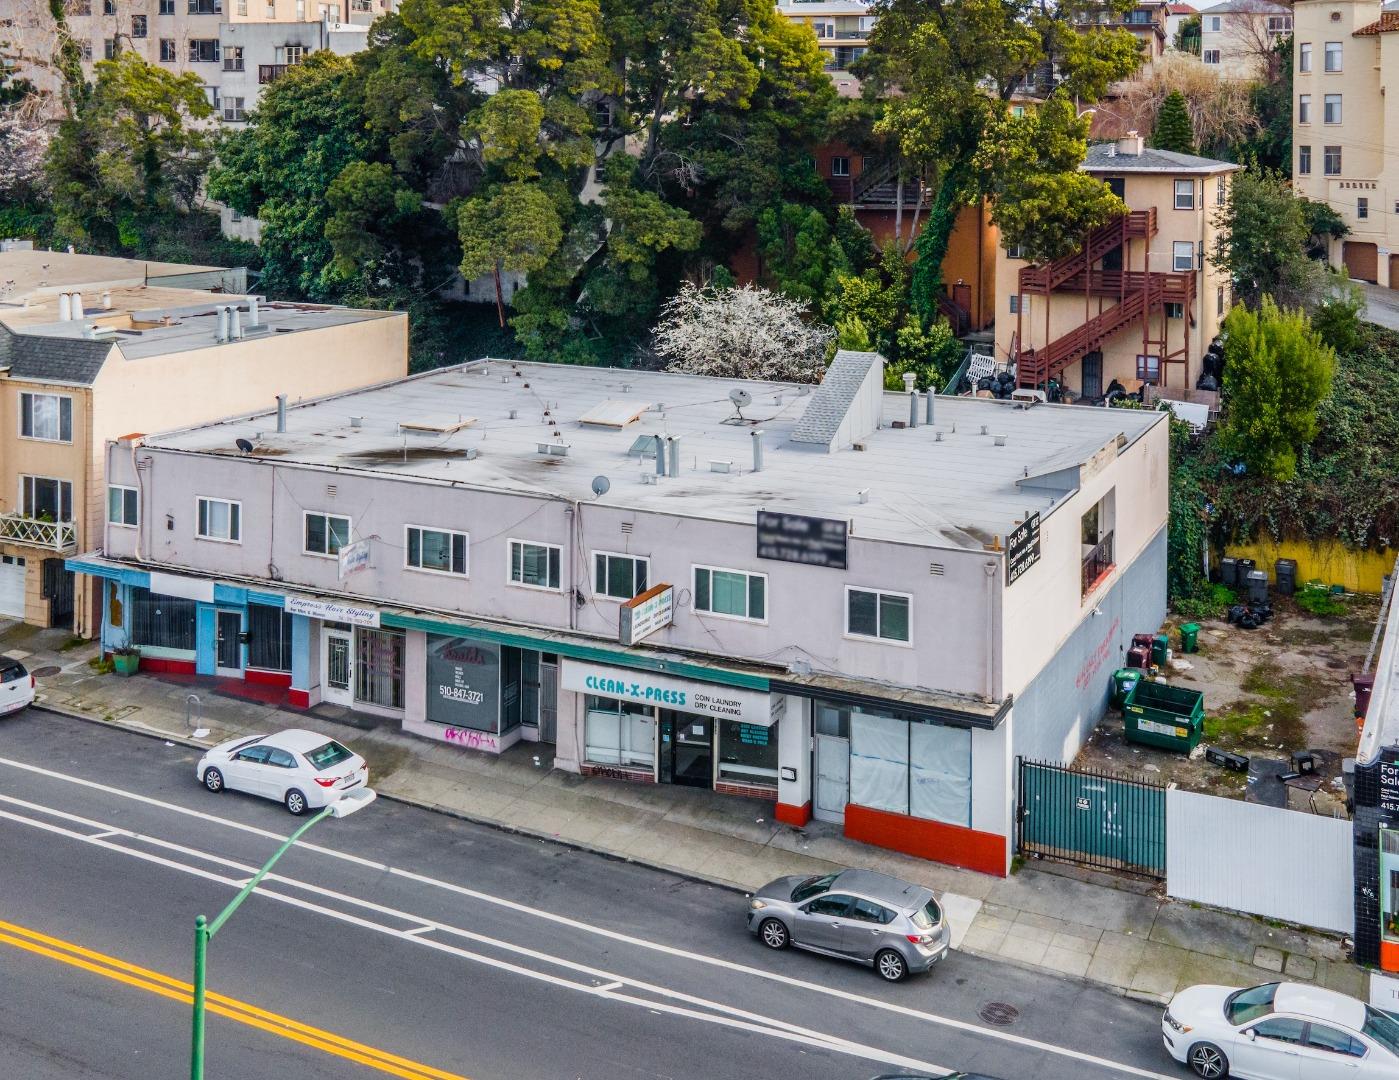 Seize a rare 75% vacant opportunity for an exceptional investment & excellent frontage. Instant income generation w/a superb Retail Building currently leased to Mayflower Spa; has options for extending or for an owner-user space w/great signage visibility; an ideal addition to your portfolio at a 6.25% - 8% Pro Forma cap. A multi-use building w/5 spacious commercial units (vacant) & 6 1BD/1BA residential apartments (3 vacant), in a desirable rental market; commercial spaces offer income potential for a variety of businesses; total interior is ~9,700 SF, ensuring ample room. The adjacent vacant land lot is poised to deliver substantial returns at ~3k SF; it's a fantastic opportunity for development or expansion; previously used as parking for adjacent commercial buildings. The property benefits from flexible zoning regulations, opening up multiple investment avenues. Increasing Building Height is an option! Abundant Space: ~12,700 SF Total Lot, & Per Appraiser Total Building ~12,868 SF.